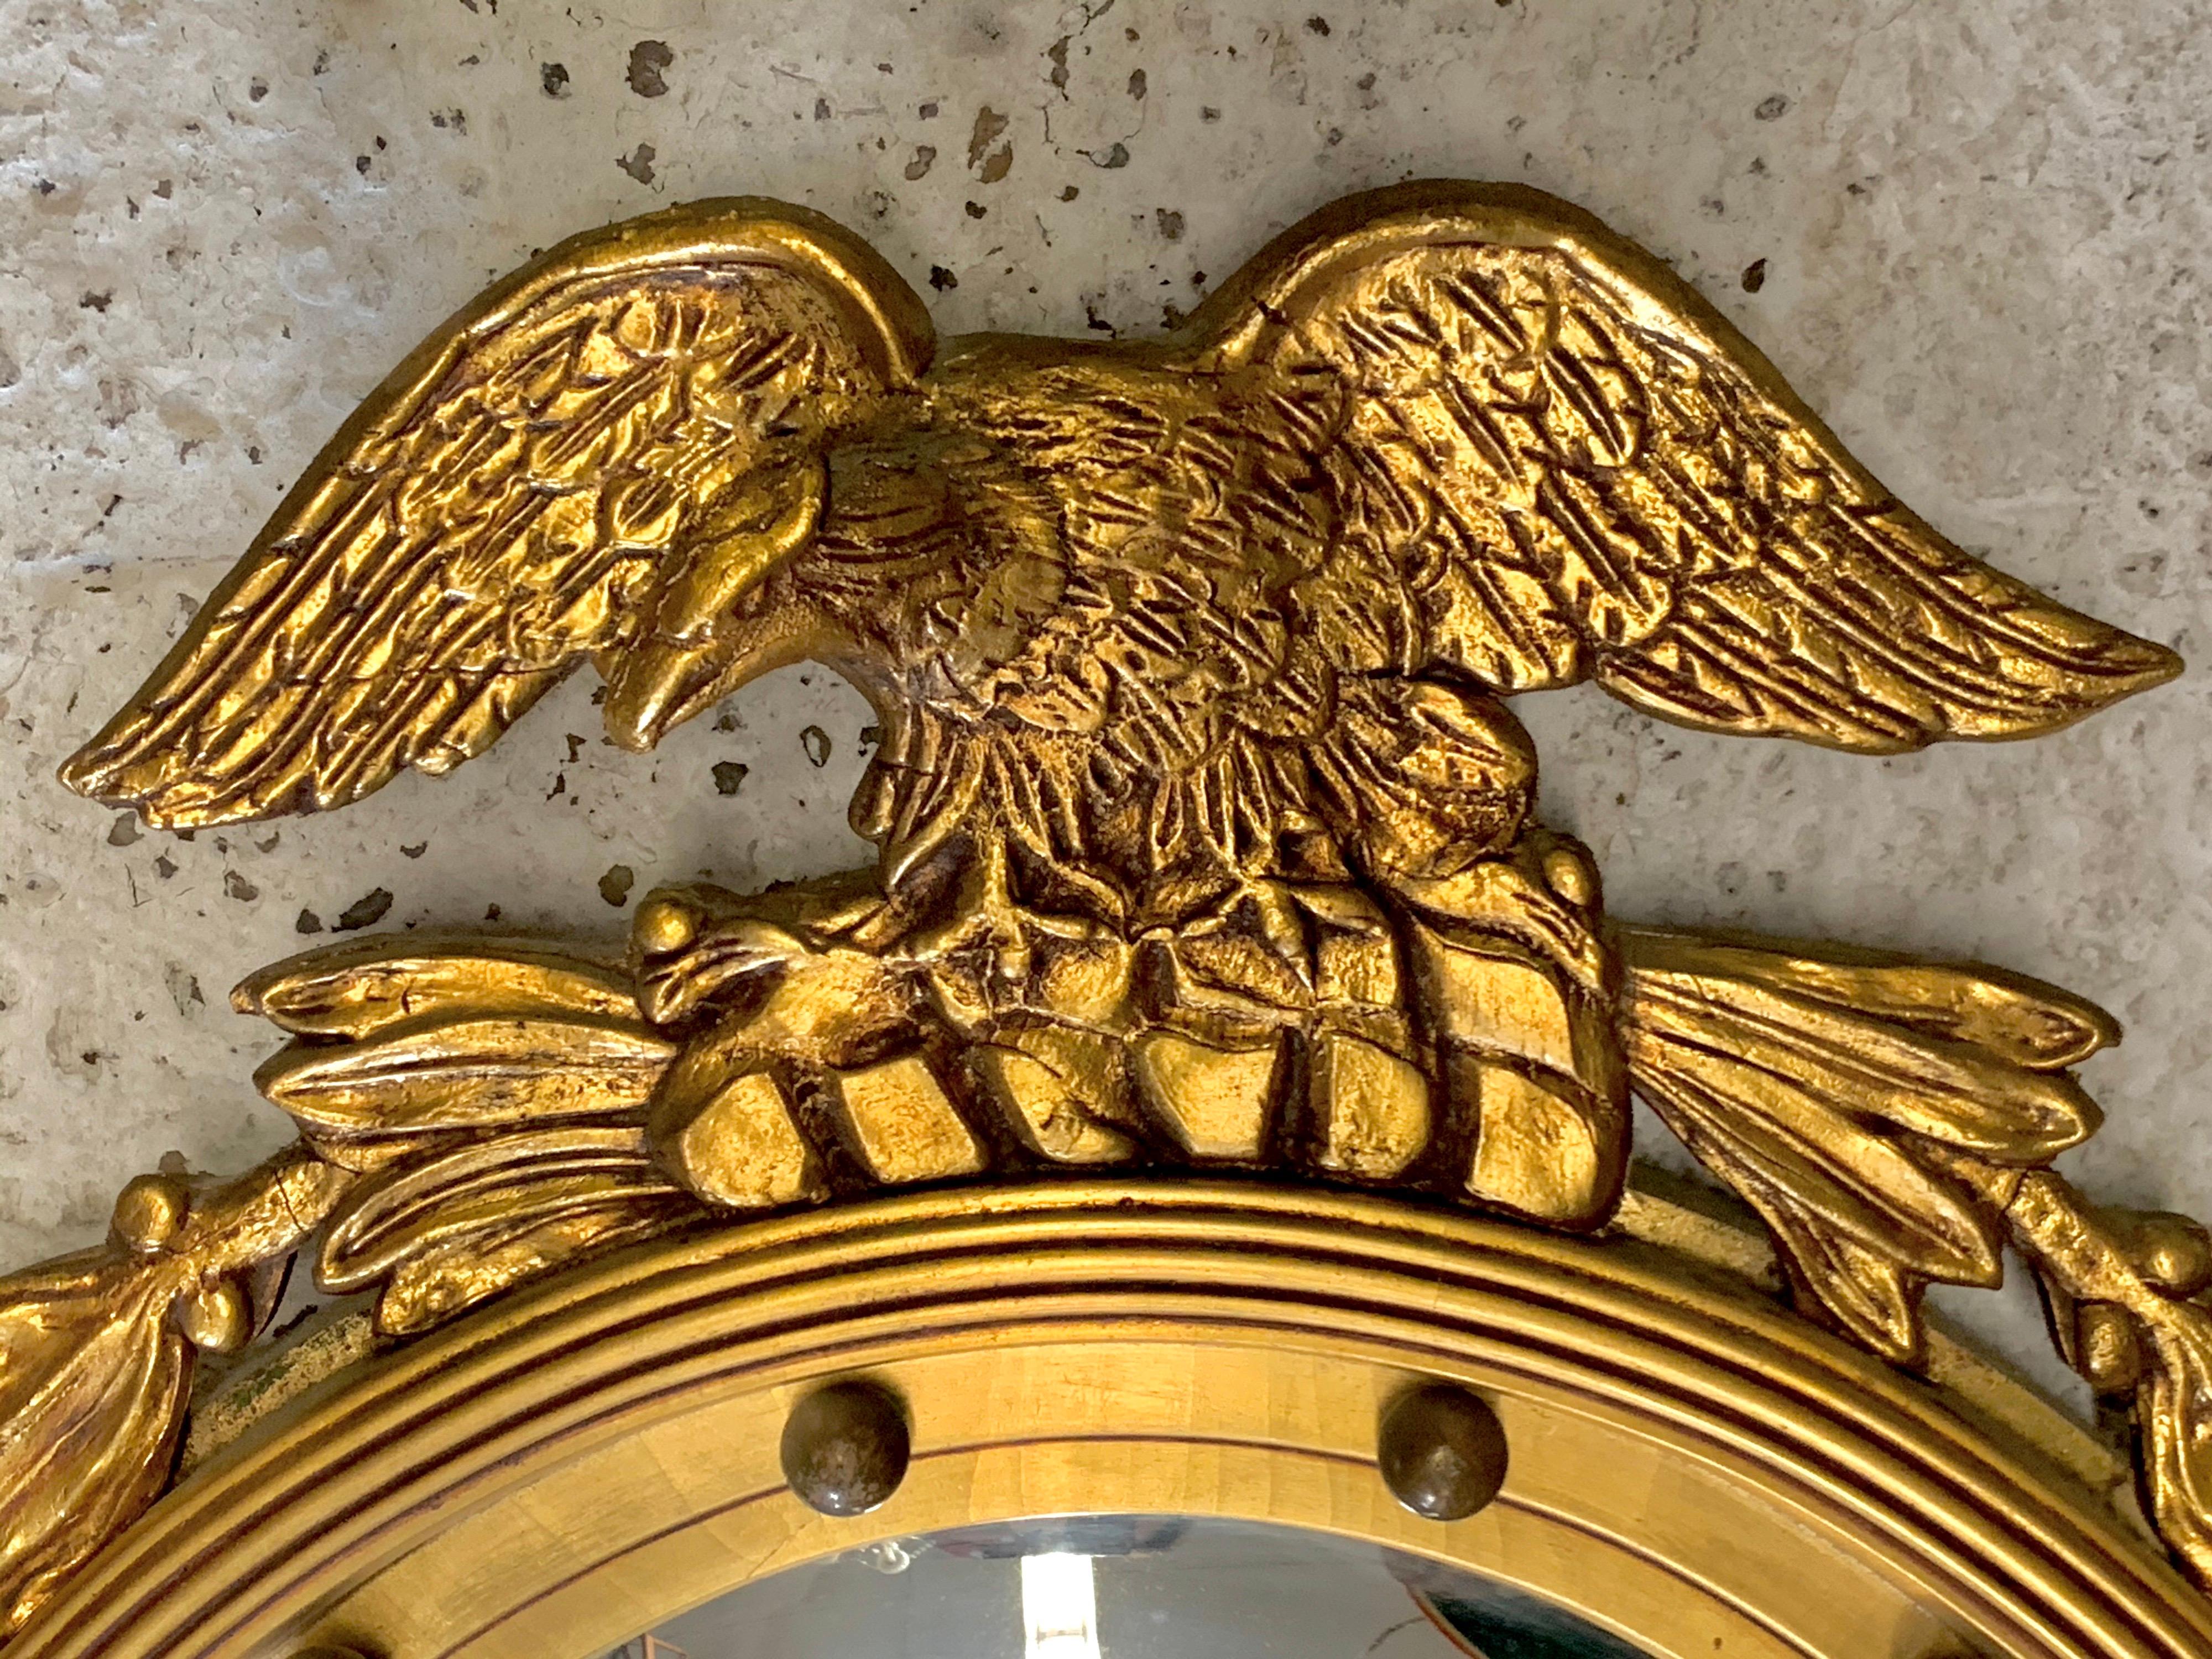 Coveted federal antique carved giltwood mirror with signature eagle crest at top. Some minor
losses in the giltwood which are easy to touch up.